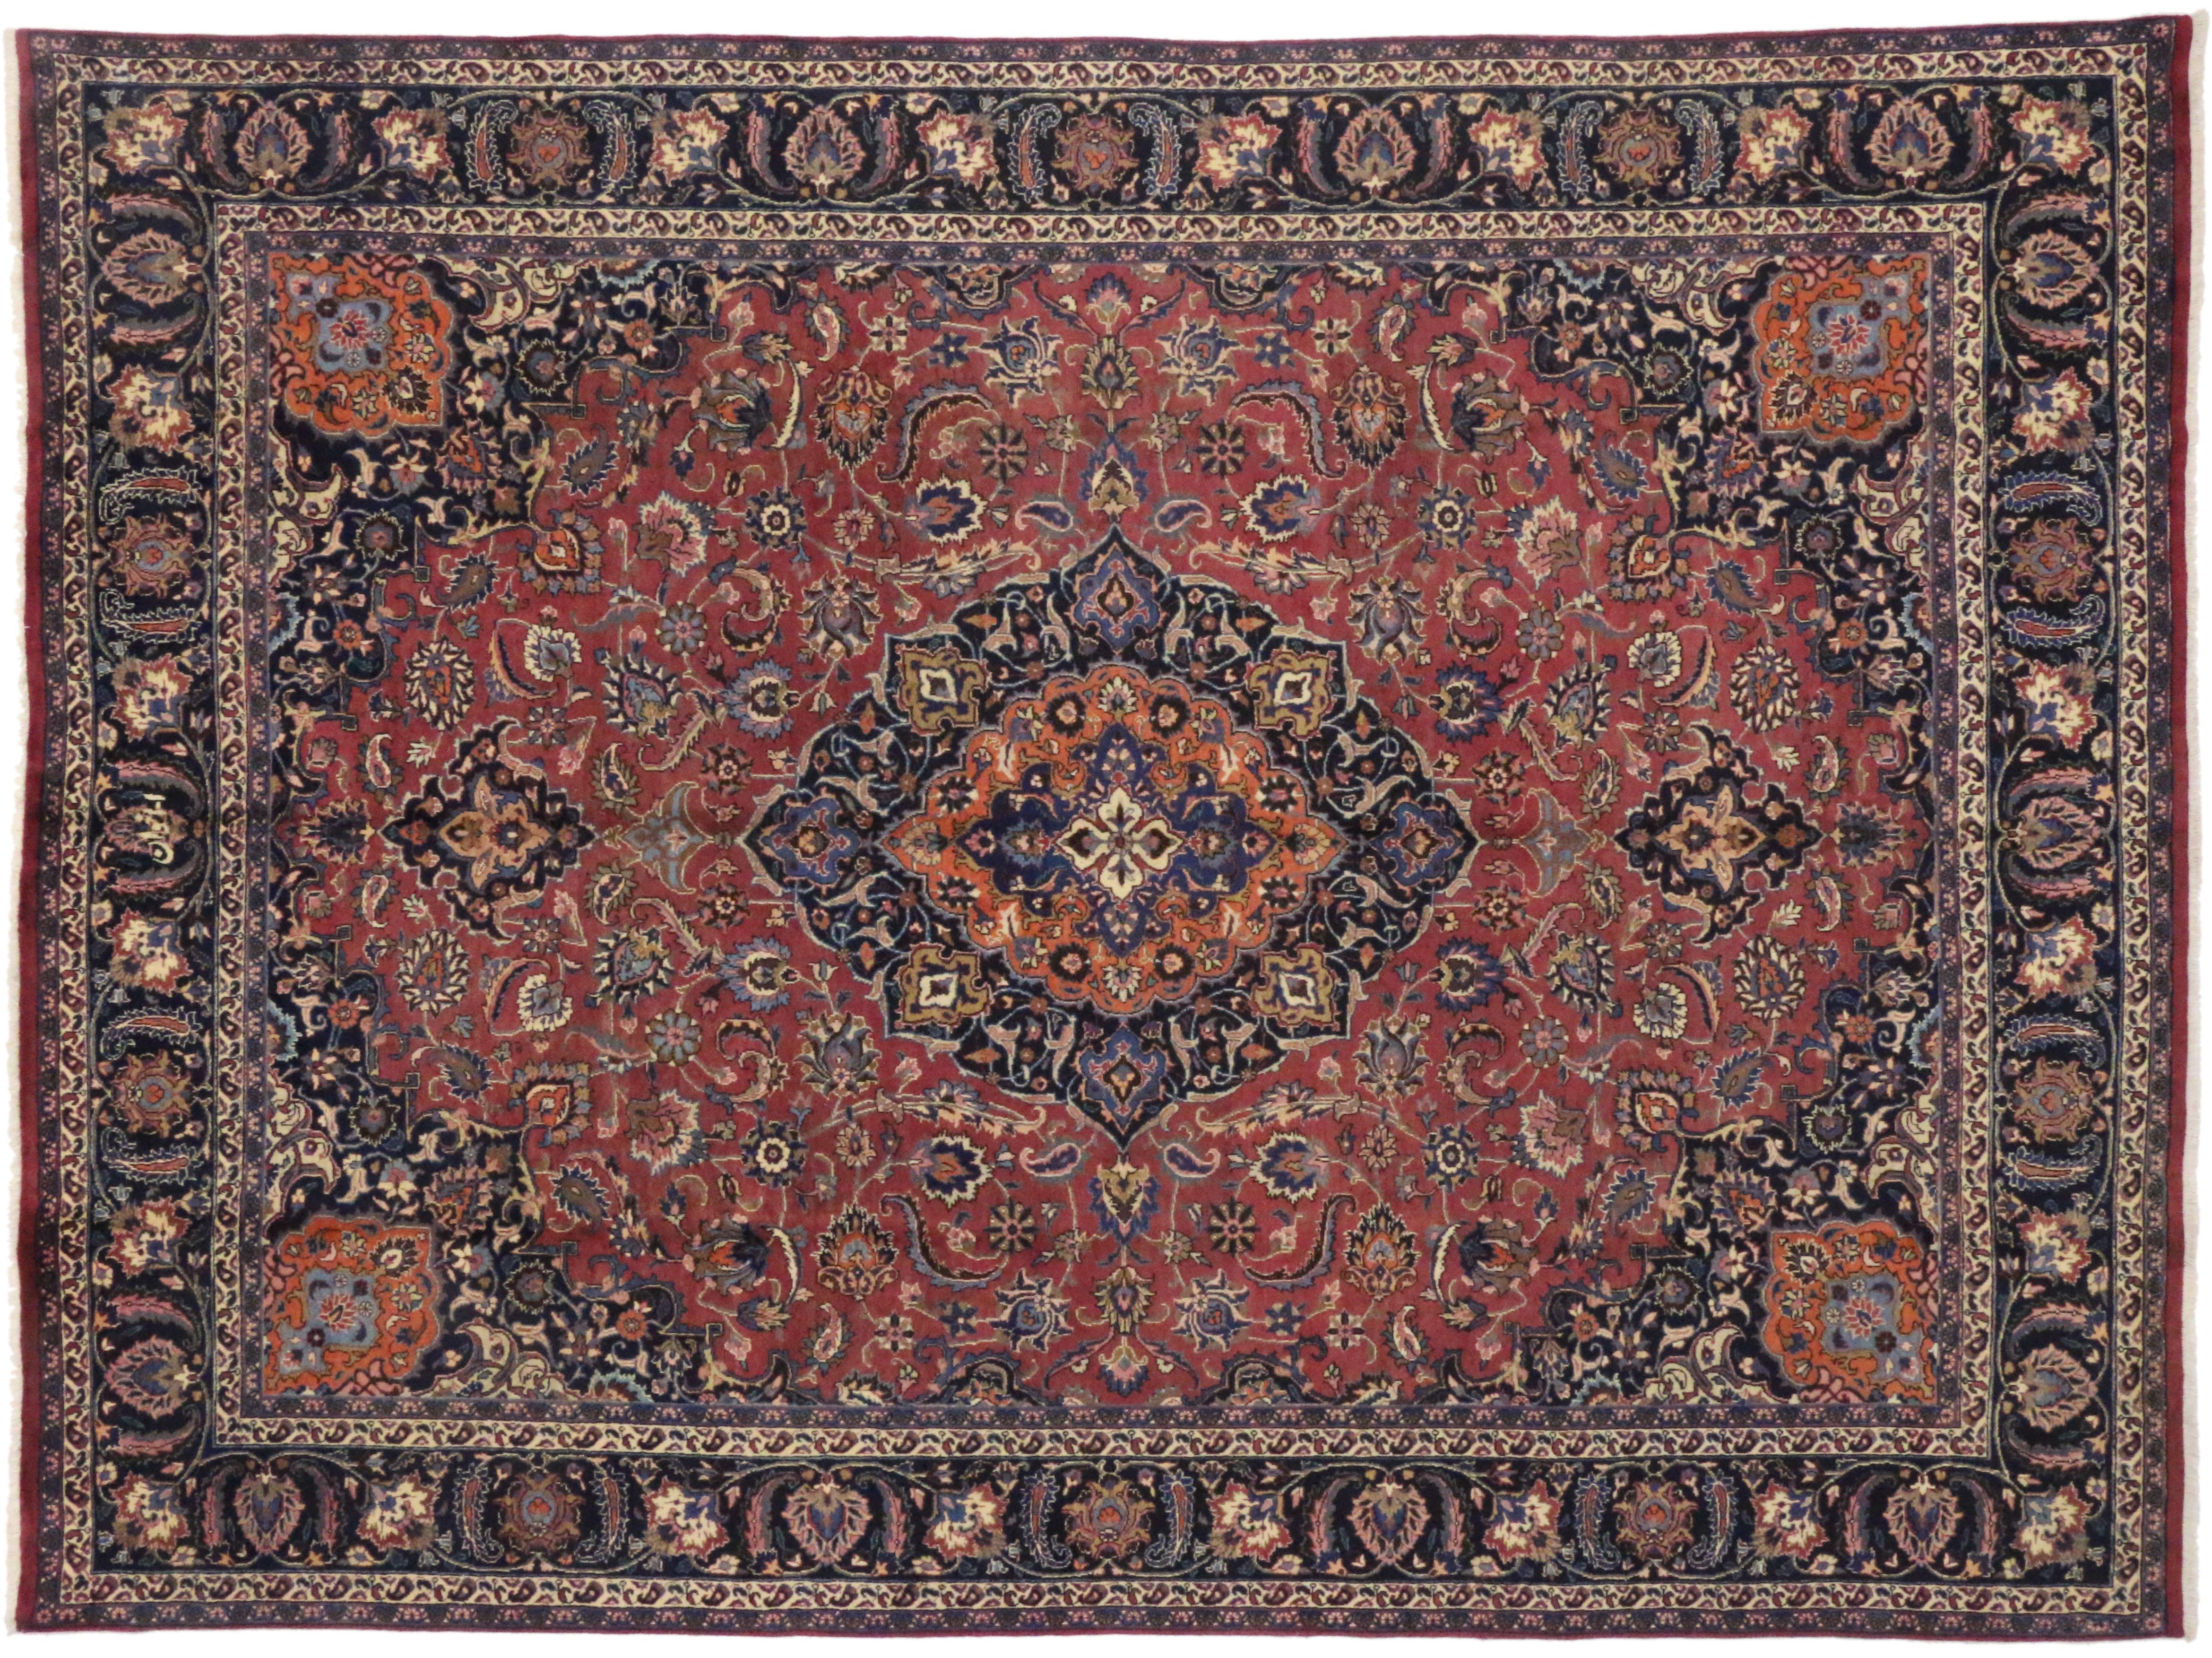 Characterizing the lavish curvilinear style of Art Nouveau, this vintage Persian Mashhad rug features an ornate centre medallion surrounded by an all-over floral pattern and arabesque spandrels. The meandering botanical motifs and ornate floral